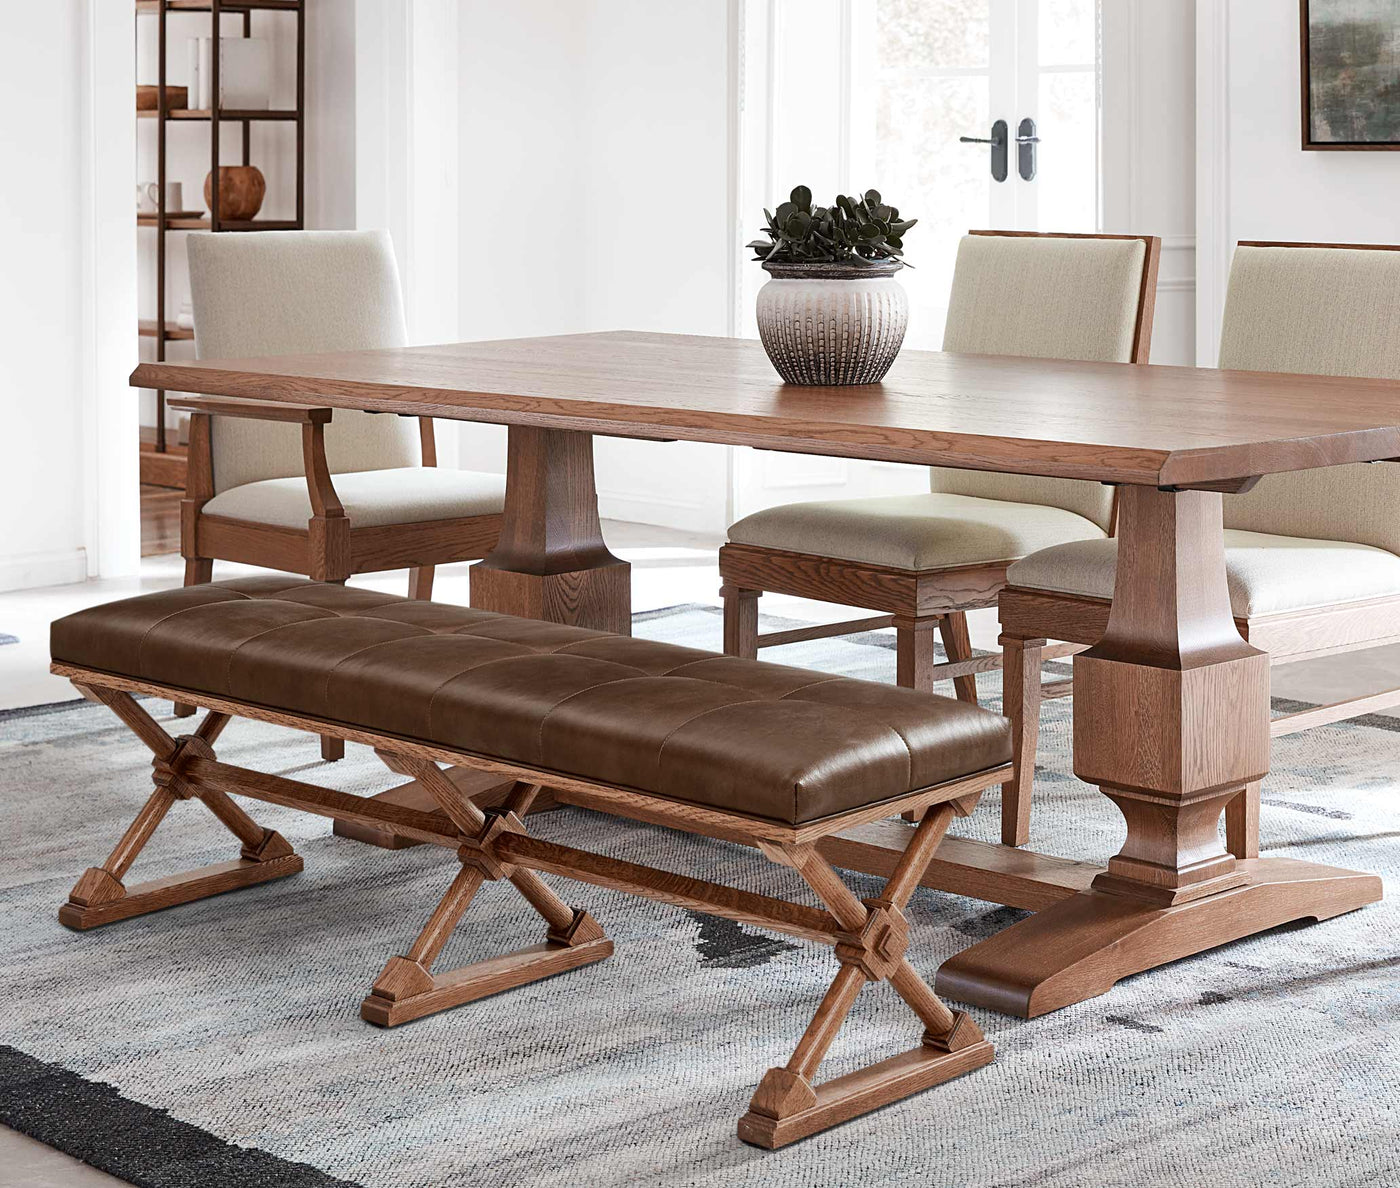 A St. Lawrence Trestle dining table with three cream upholstered chairs and a bench with a brown leather seat lining one side of the table.